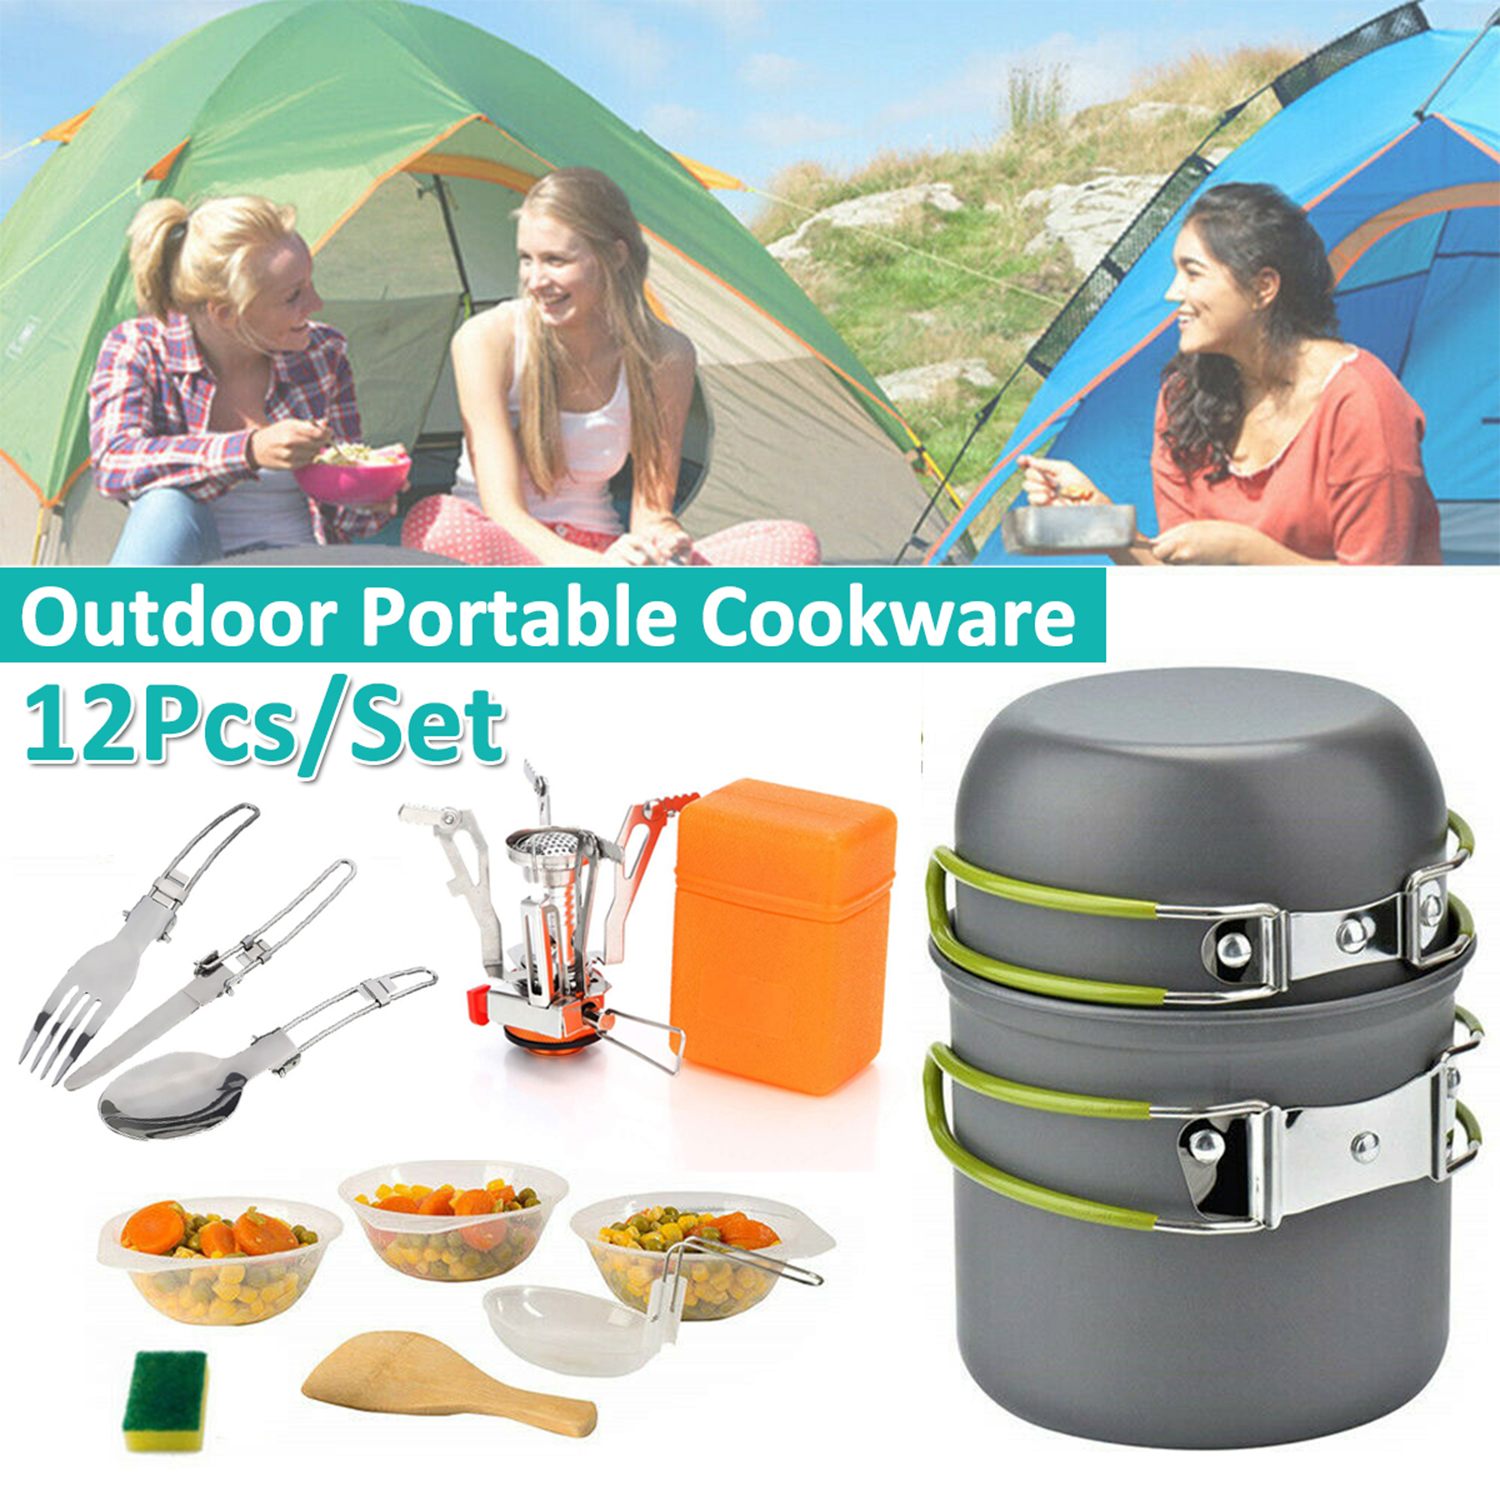 GL Portable Light Outdoor Camping Cookware Sets Gas Stove with Foldable Tableware Pan Dishwashing Sponge Hiking Picnic Tool 2